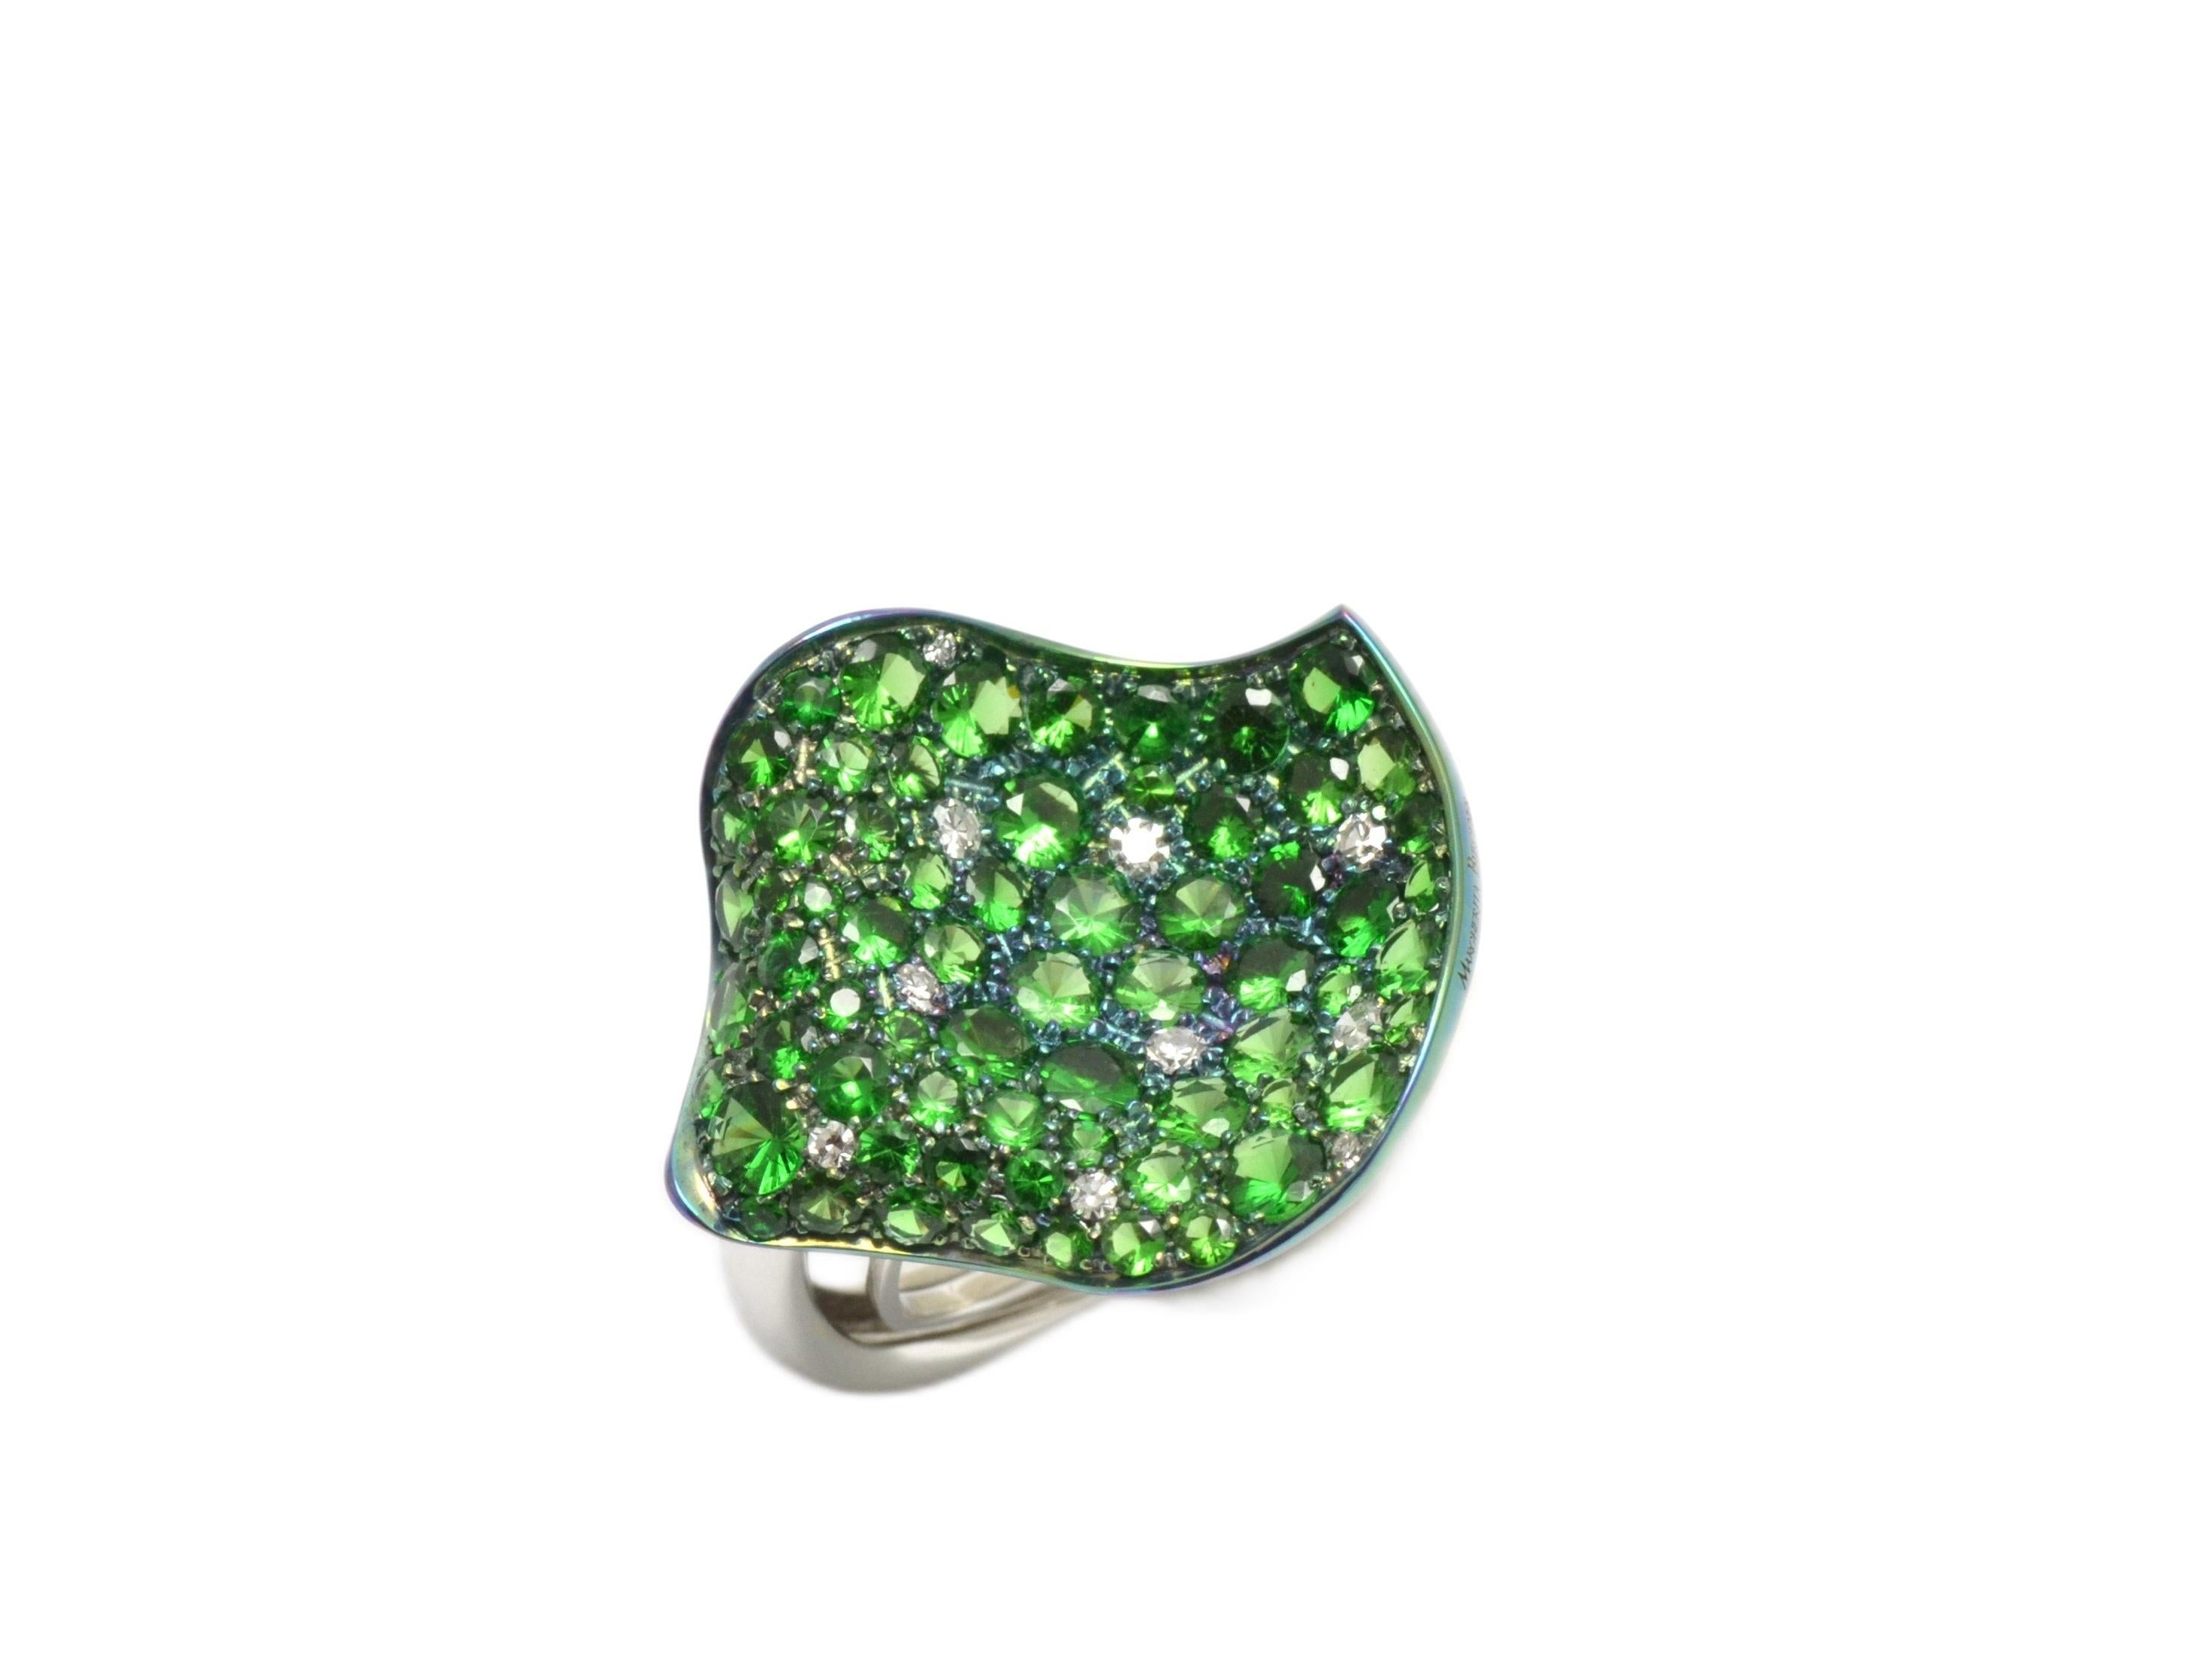 Handmade and hand shaped as a rose petal, the titanium ring is fully pavé set in tsavorite garnets, in different sizes, plus 10 round diamonds. Oxidated in green color (color in titanium is resistant), the ring features shanks in white gold.
Very